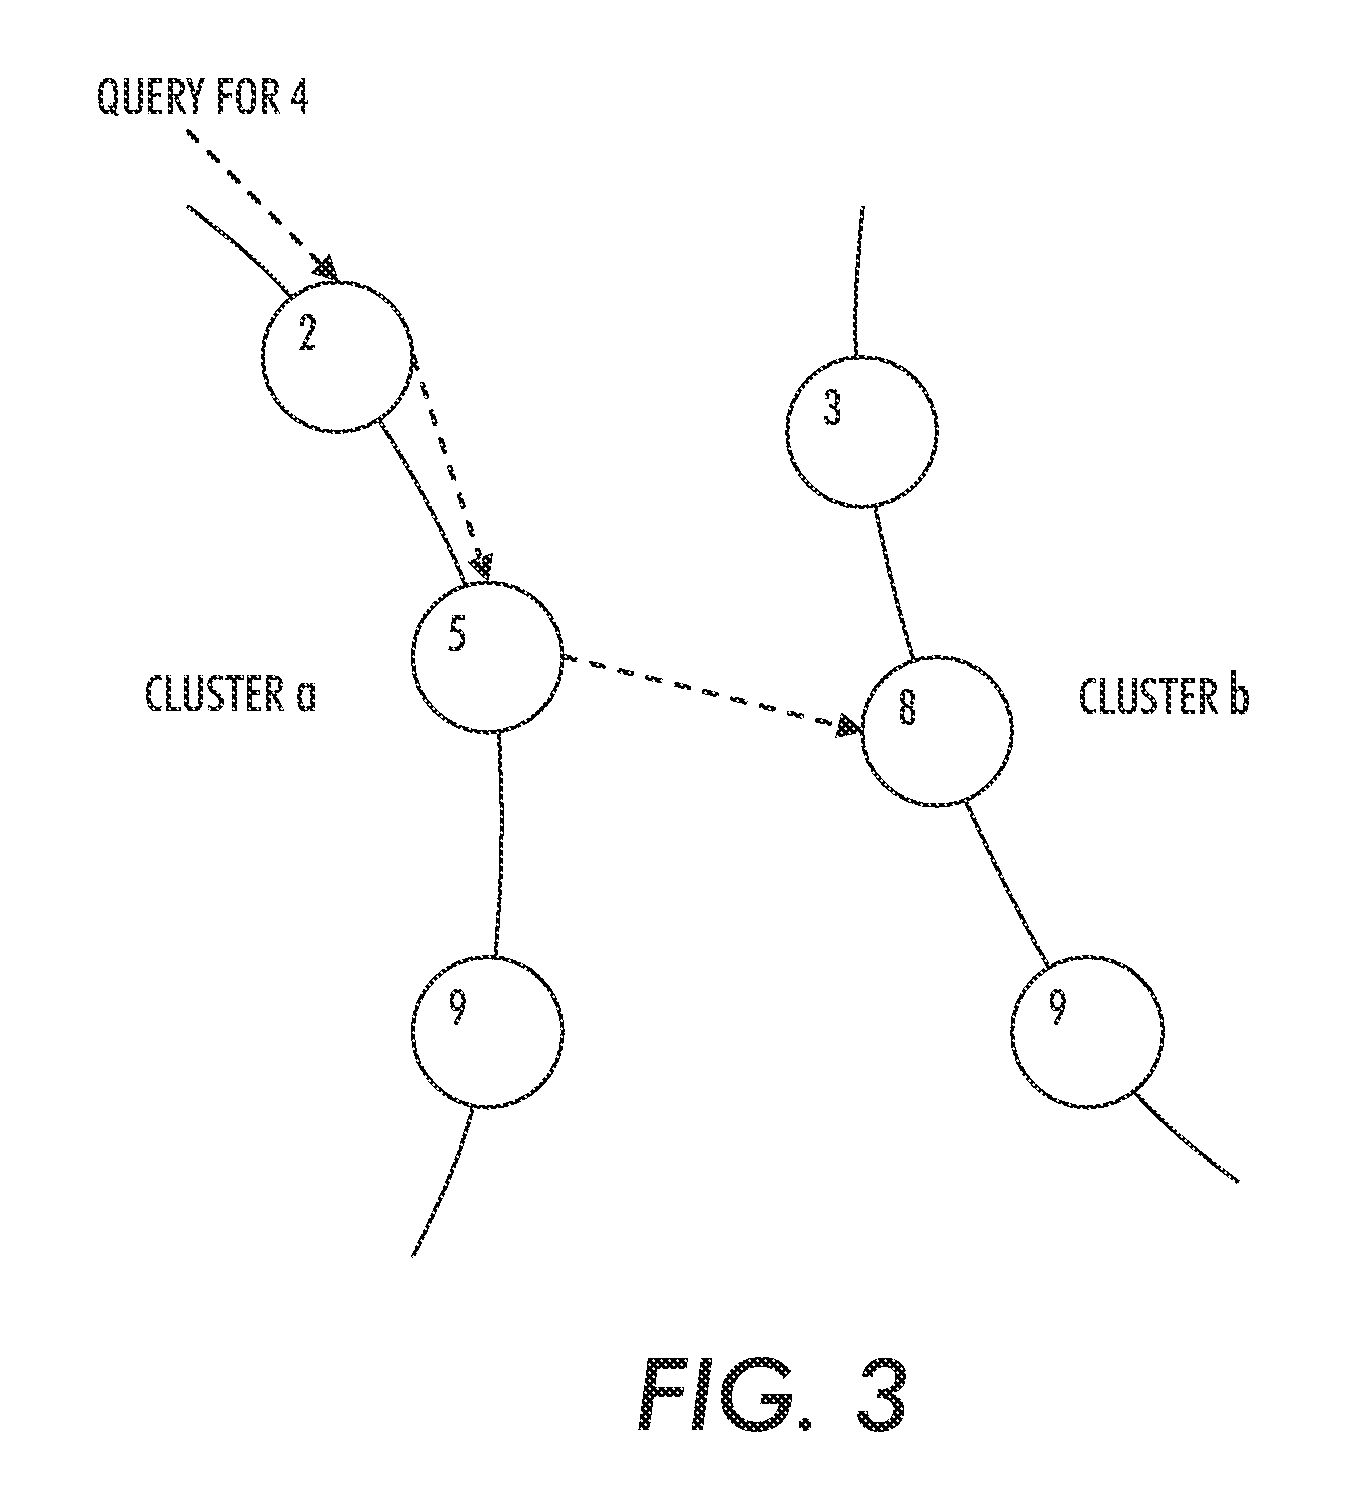 Two-level structured overlay design for cluster management in a peer-to-peer network